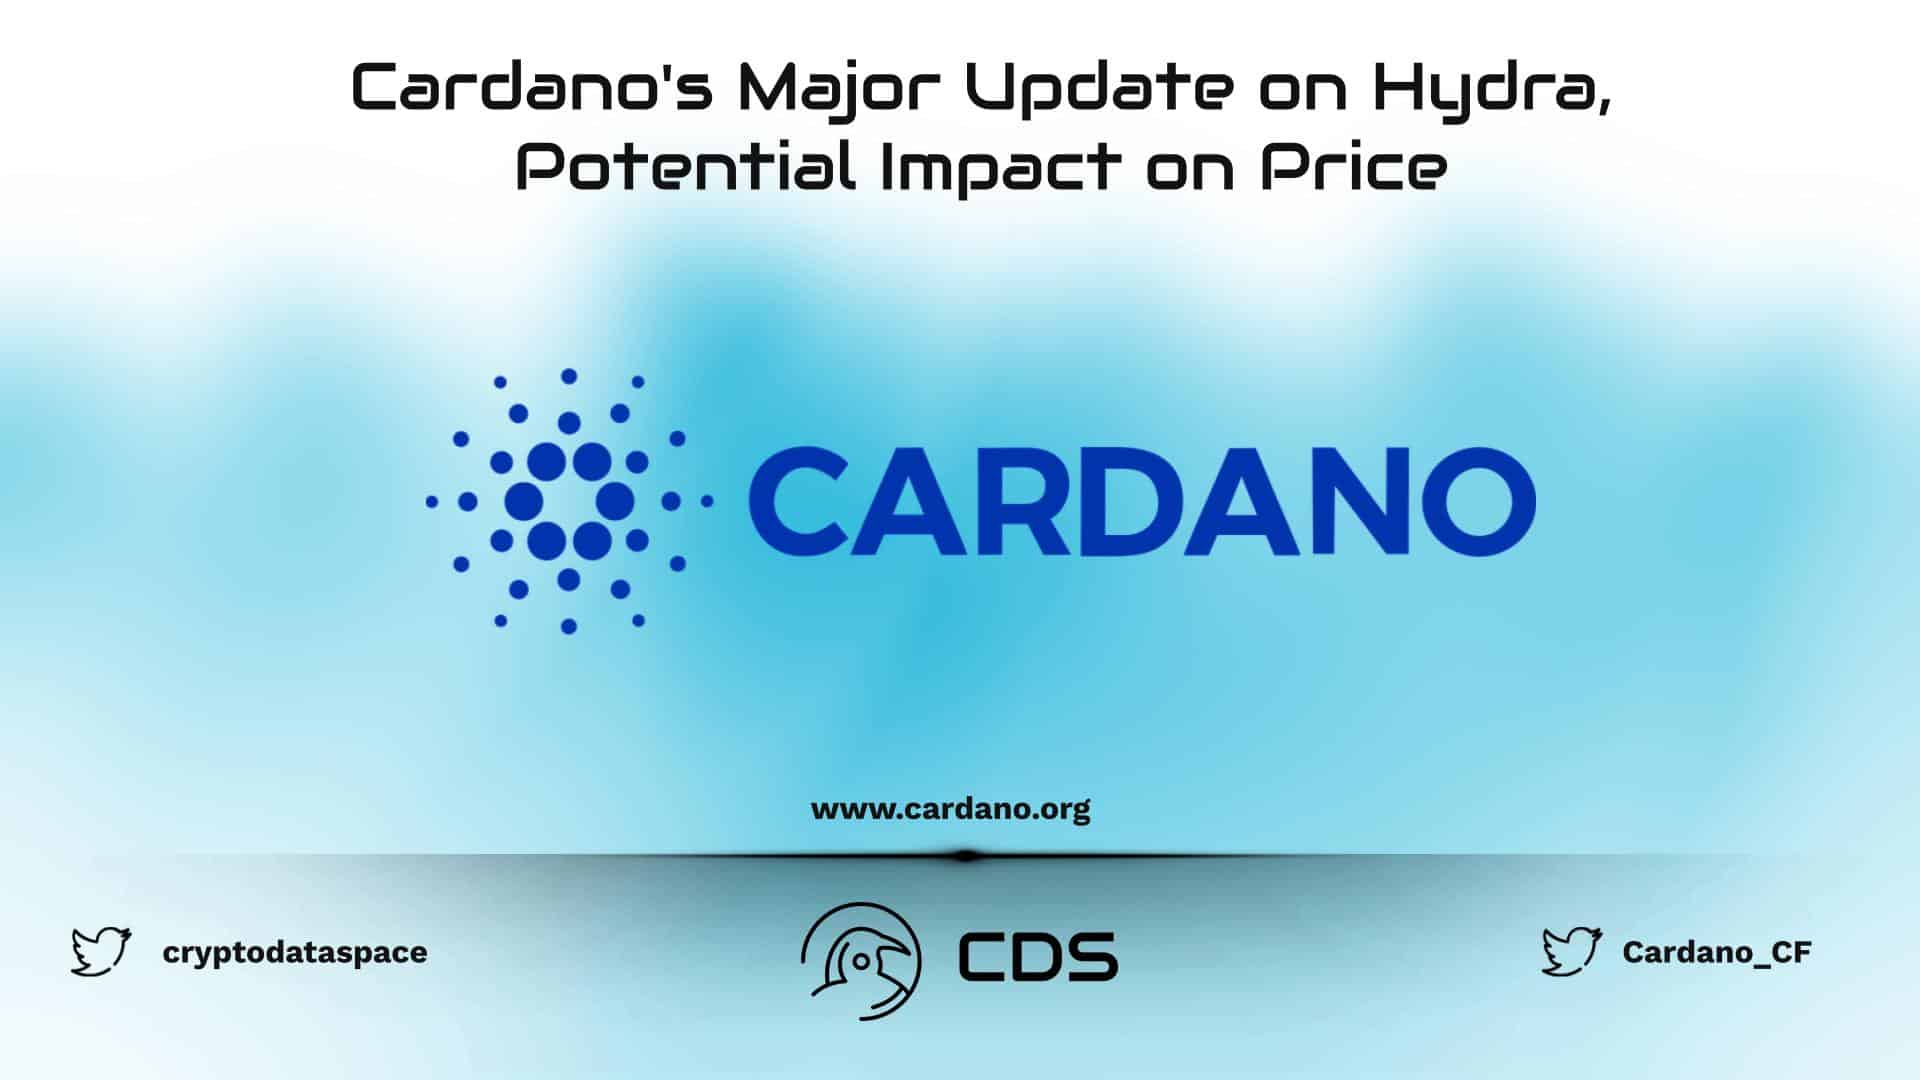 Cardano's Major Update on Hydra, Potential Impact on Price